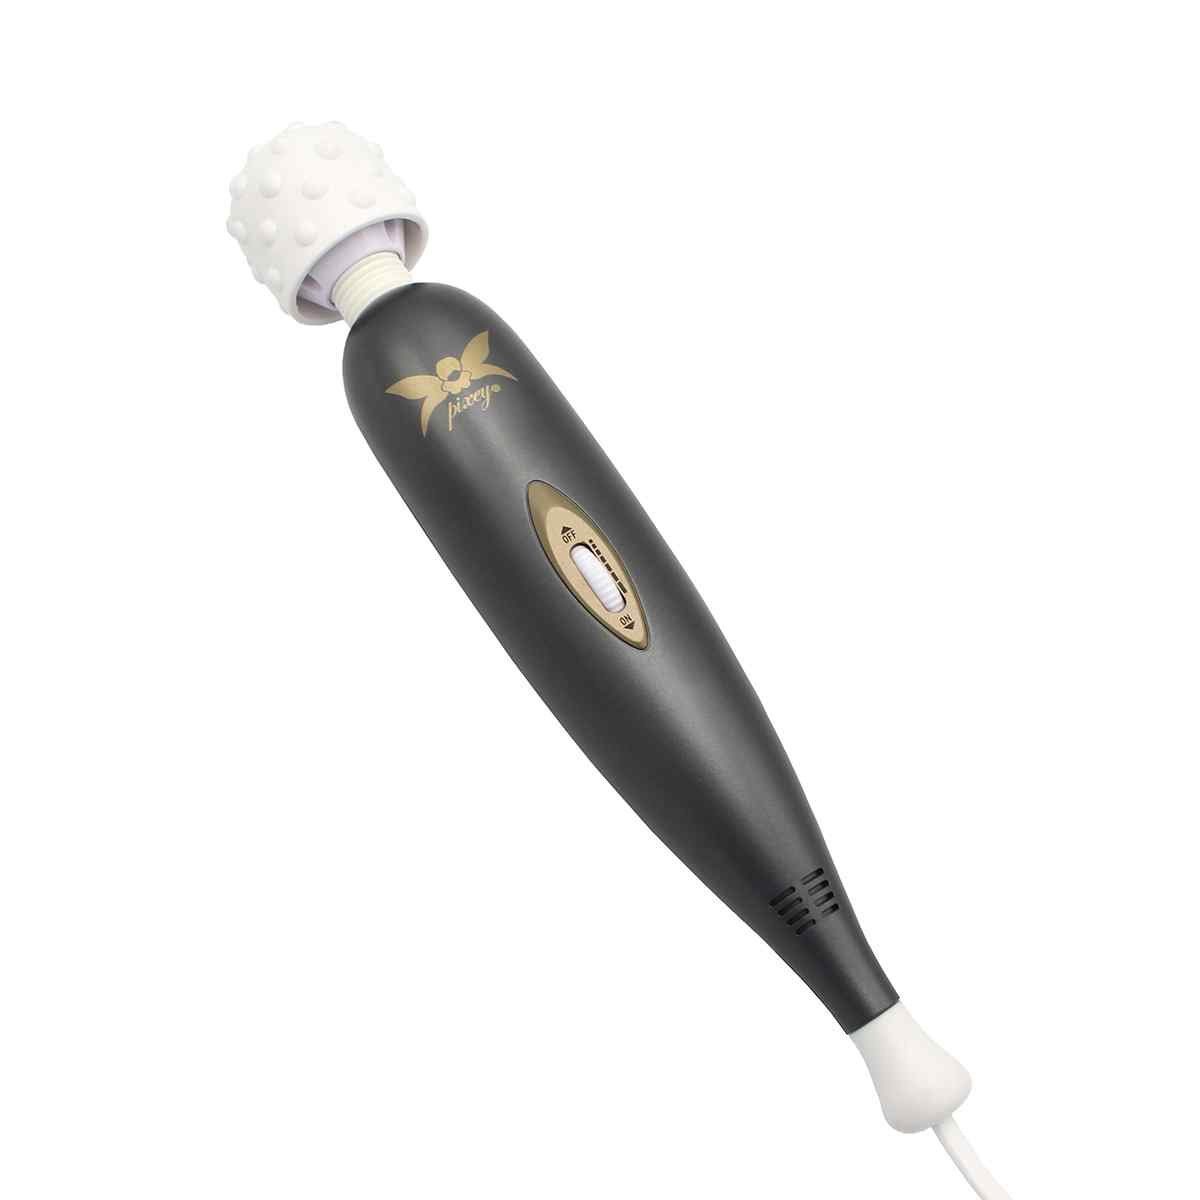 Vibration extrem Exceed kraftvolle Massager Pixey Edition), Wand PIXEY (New